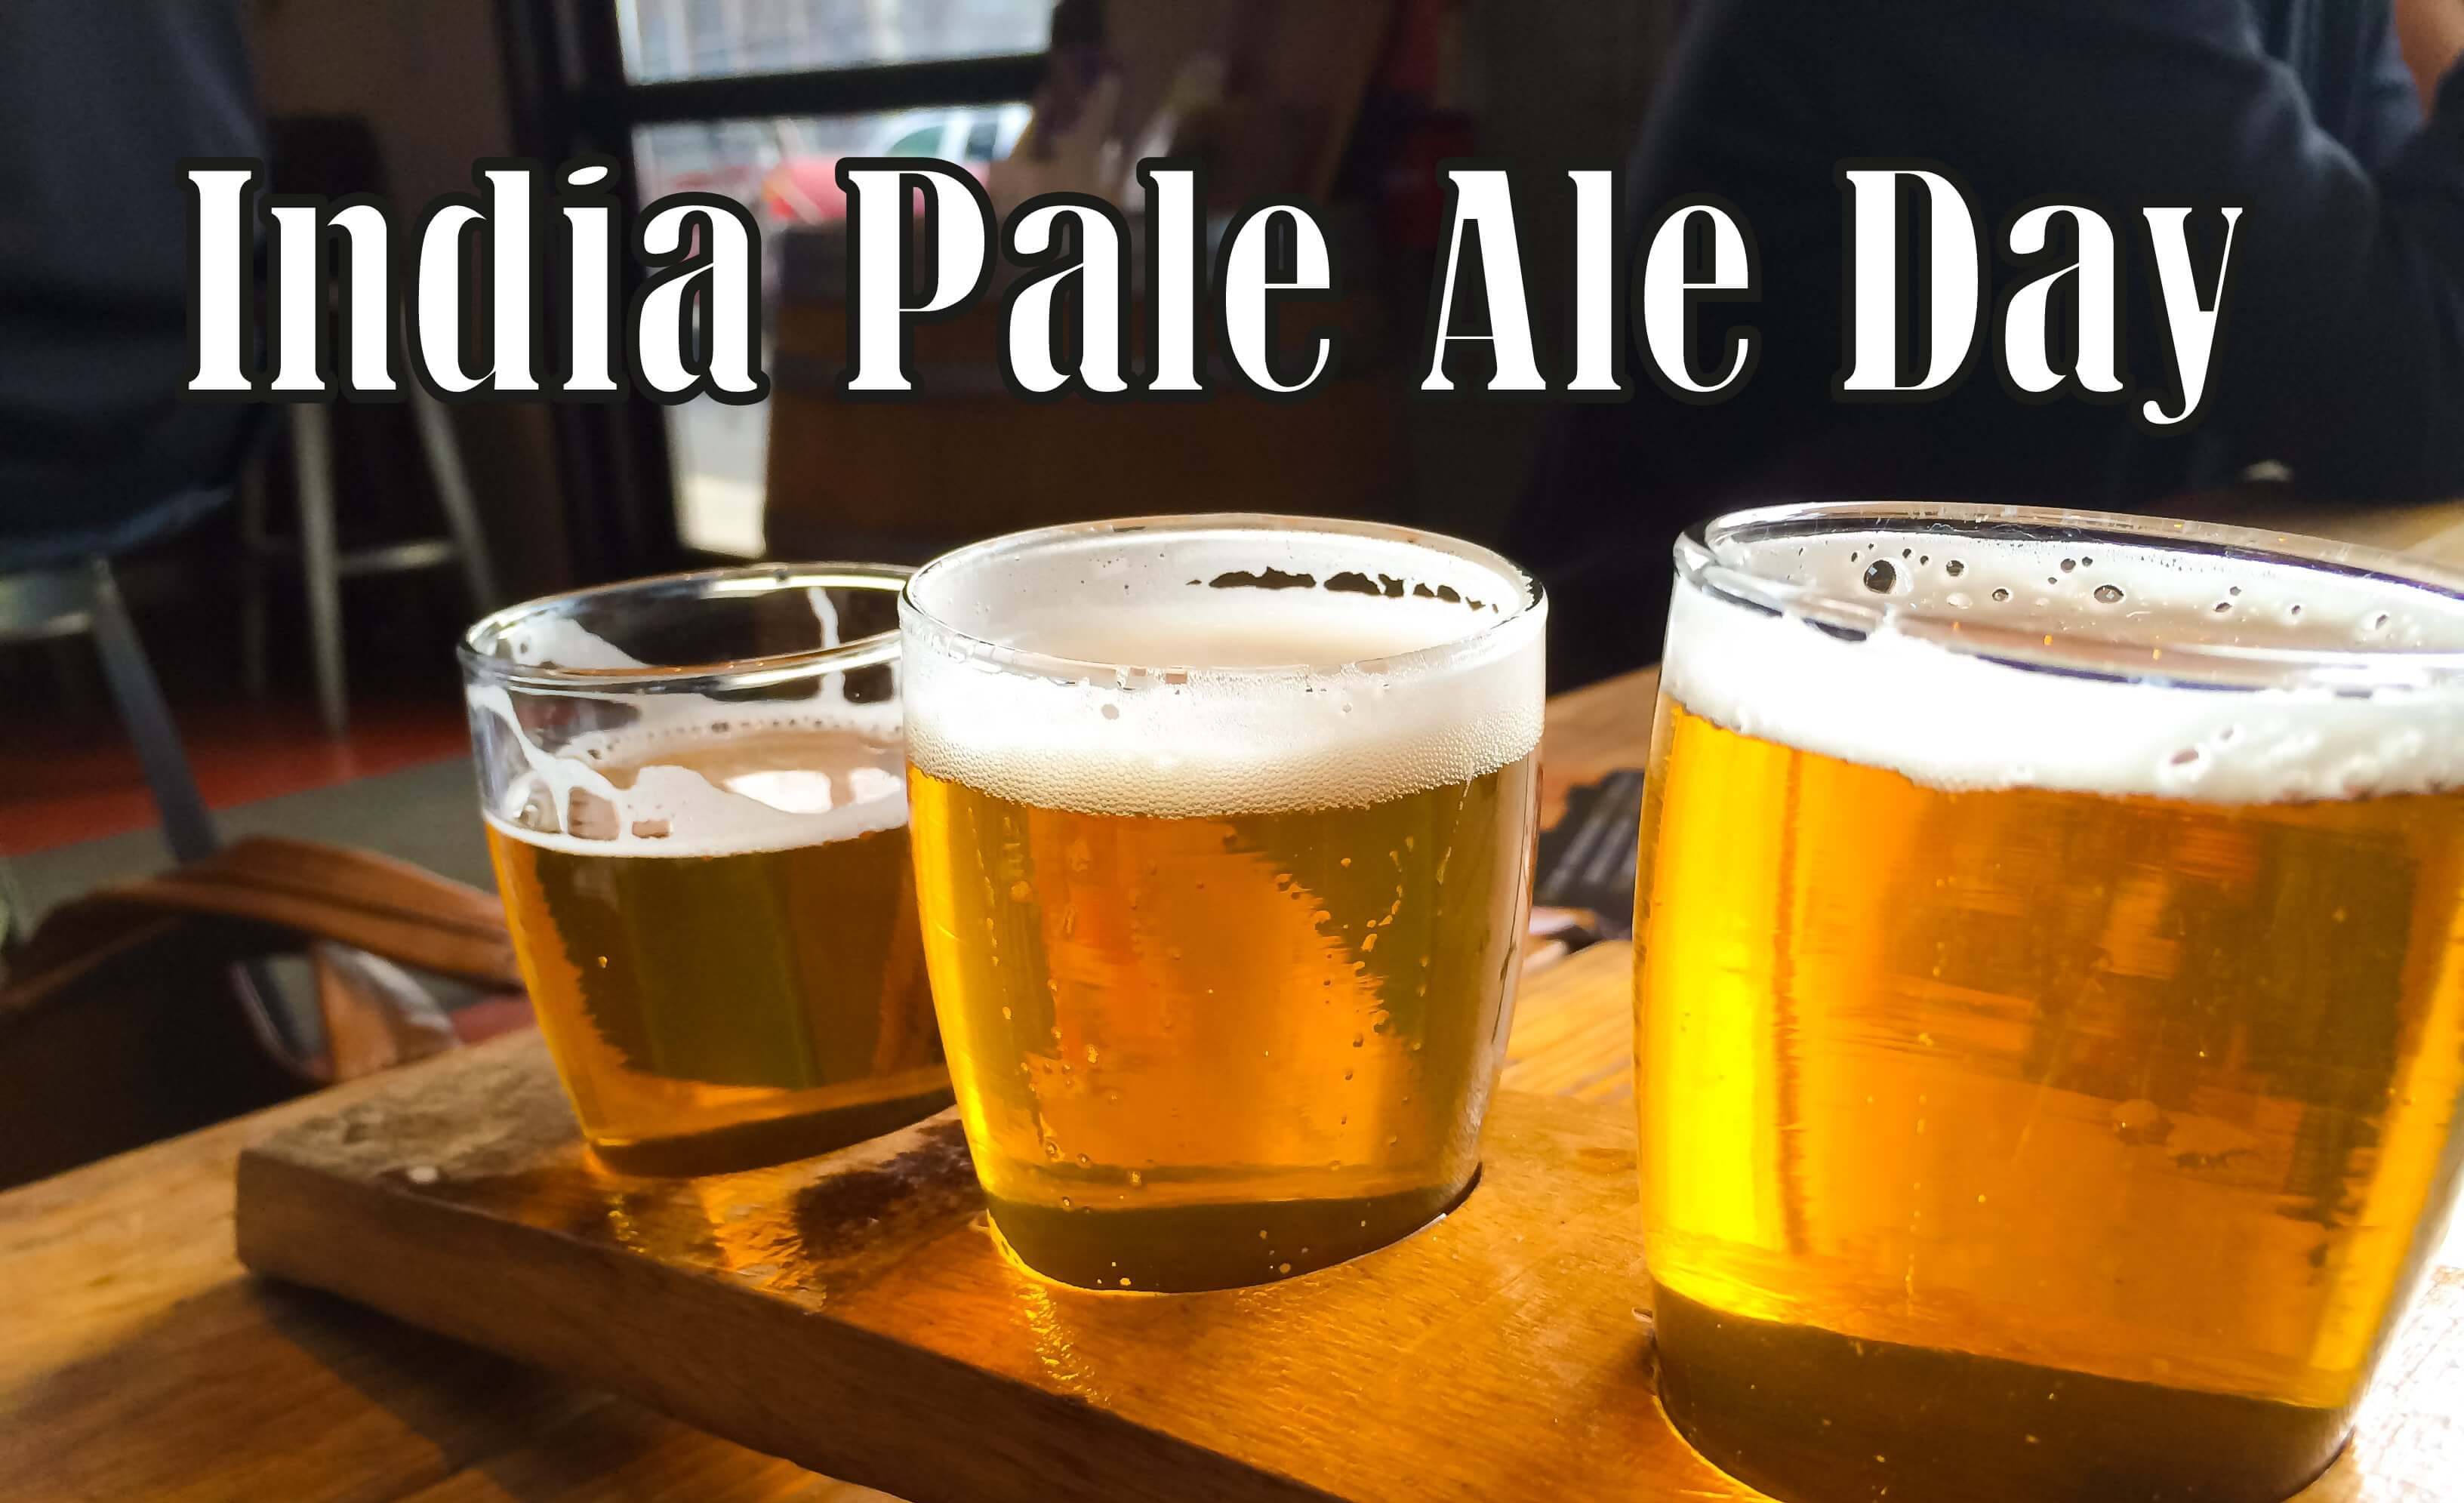 India Pale Ale Day